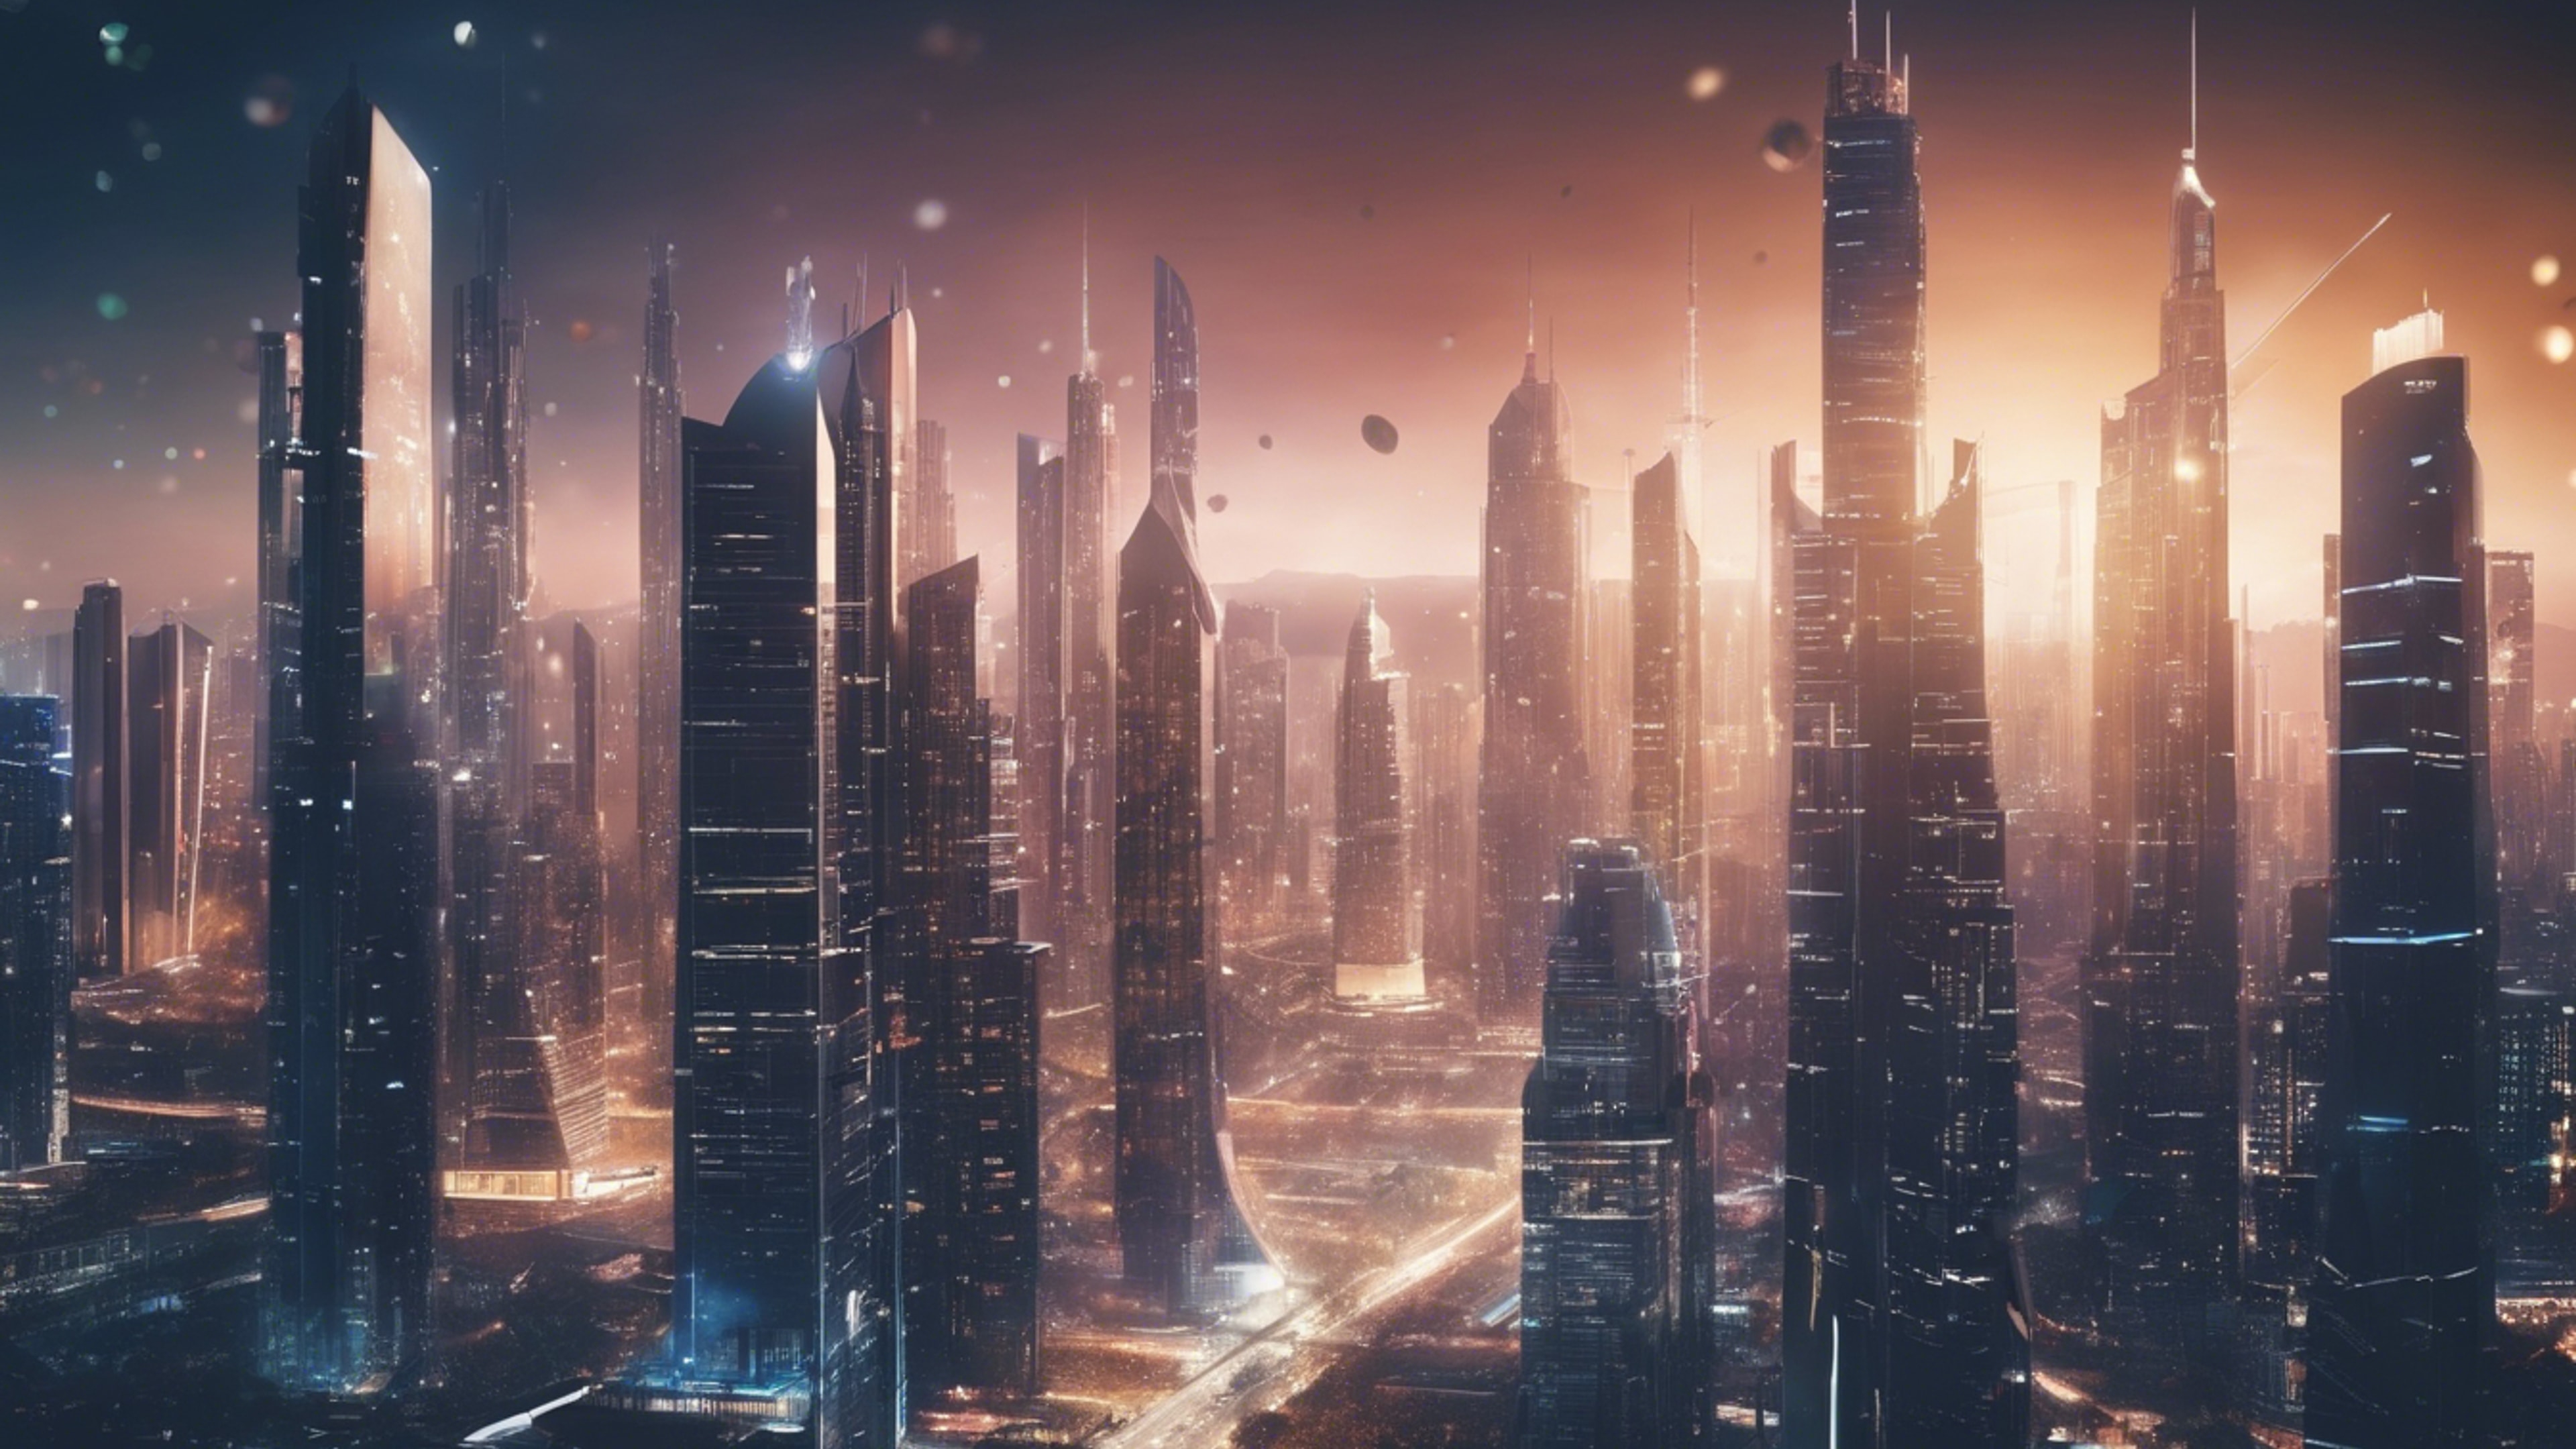 A detailed illustration of a megalopolis skyline with futuristic, AI-designed structures. ورق الجدران[5acce17a495b4f288757]